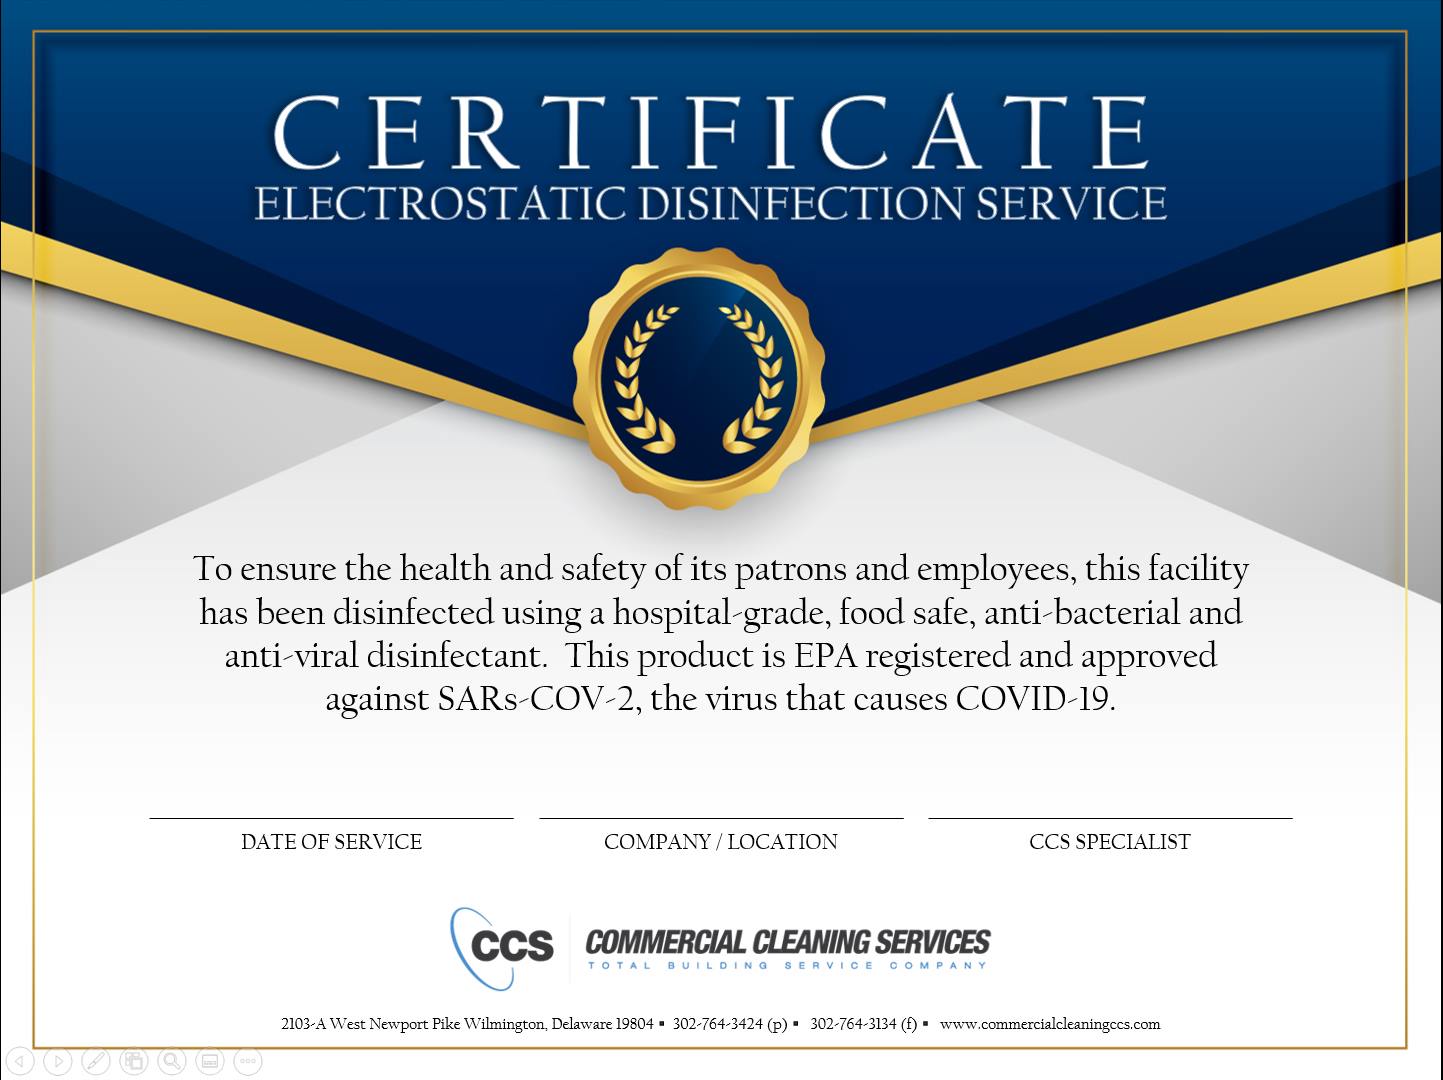 Electrostatic Disinfection Service Certificate